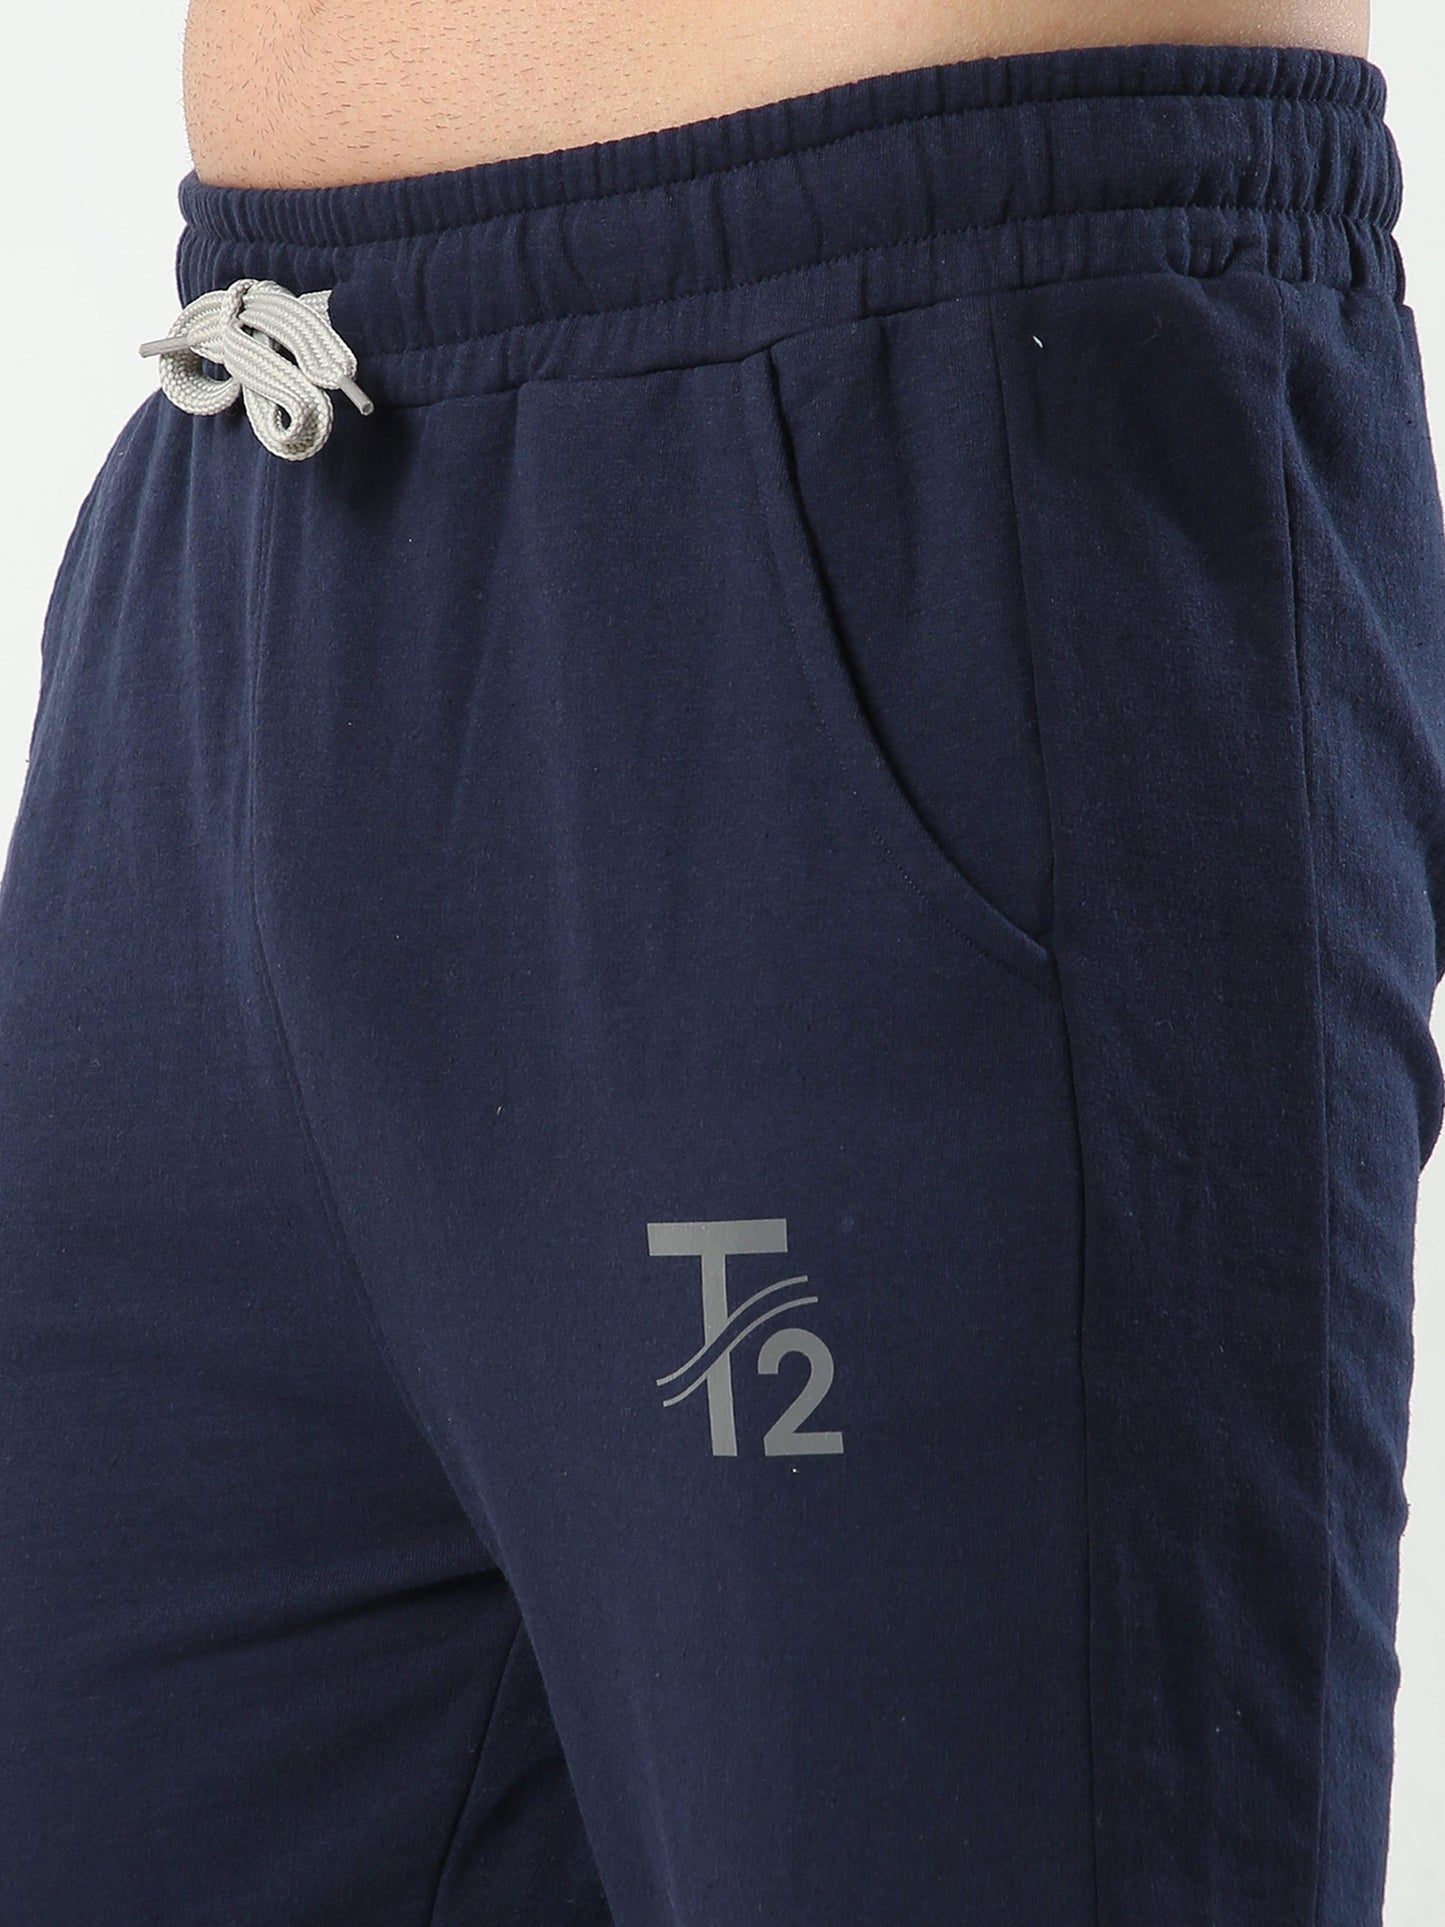 All Day Comfy Men's Cotton Joggers - Navy with Melange Side Panel